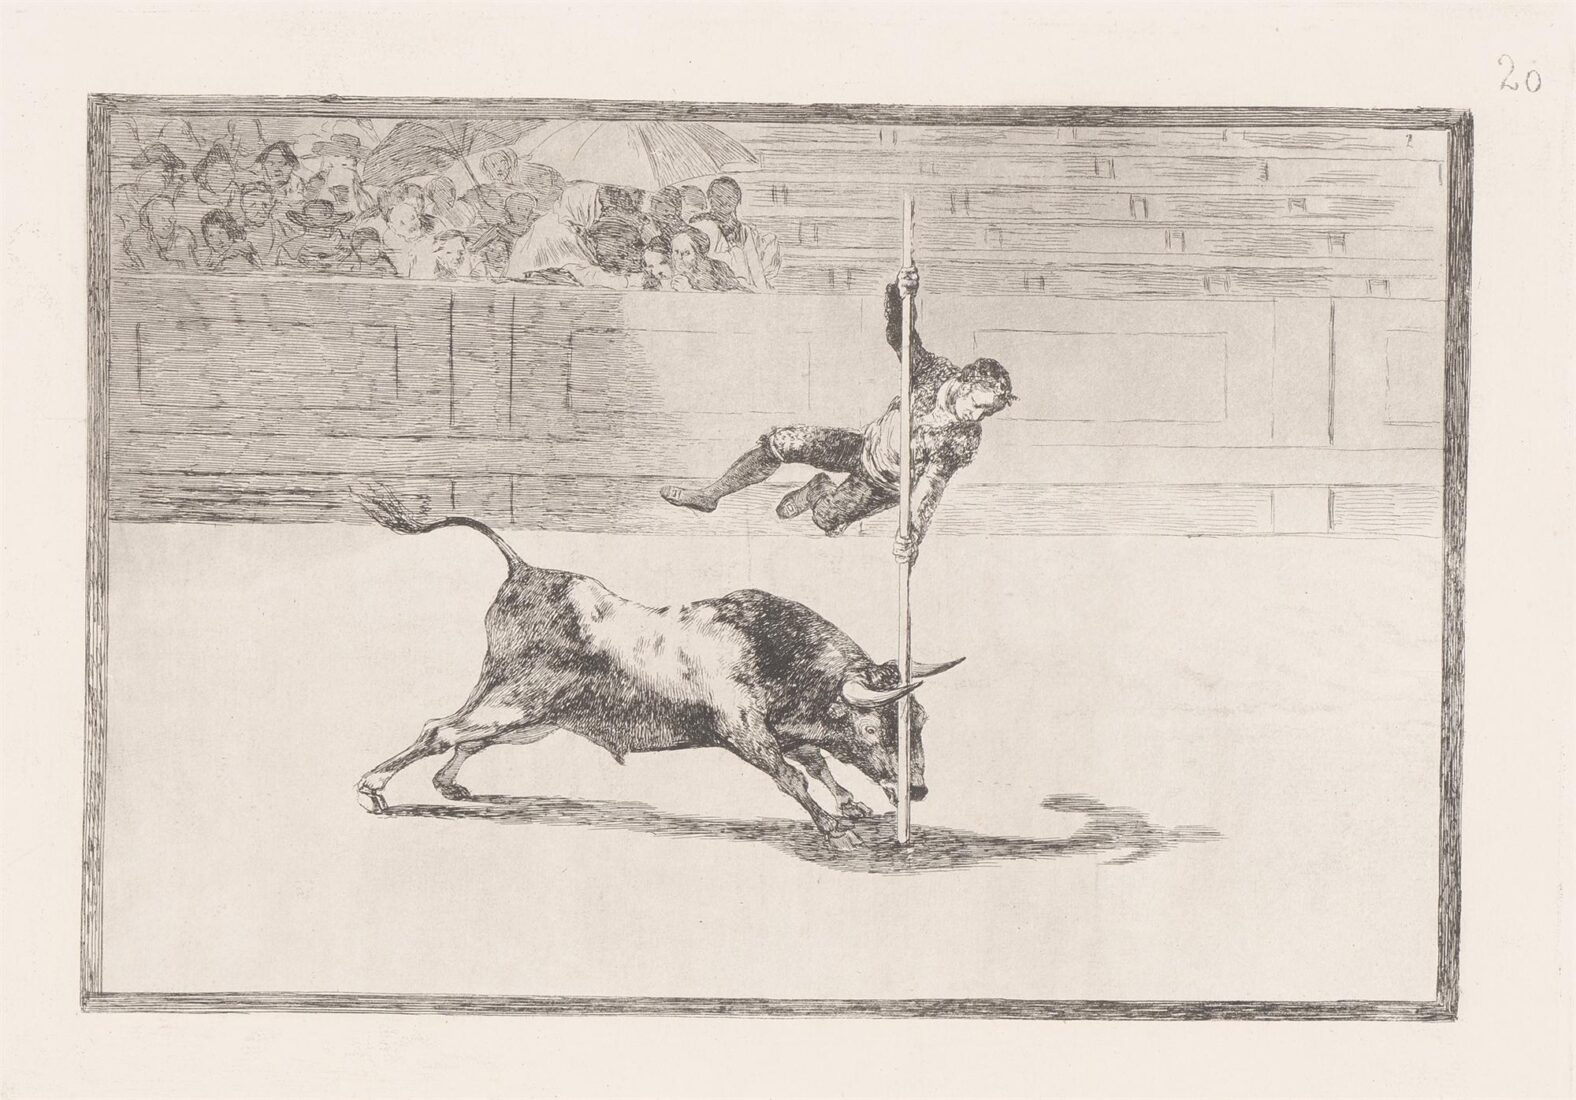 From the series “TauromaqThe agility and audicity of Juanito Apinani in [the ring] at Madrid. (Ligereza y atrevimiento de Juanito Apinani en la de Madrid) - Goya y Lucientes Francisco